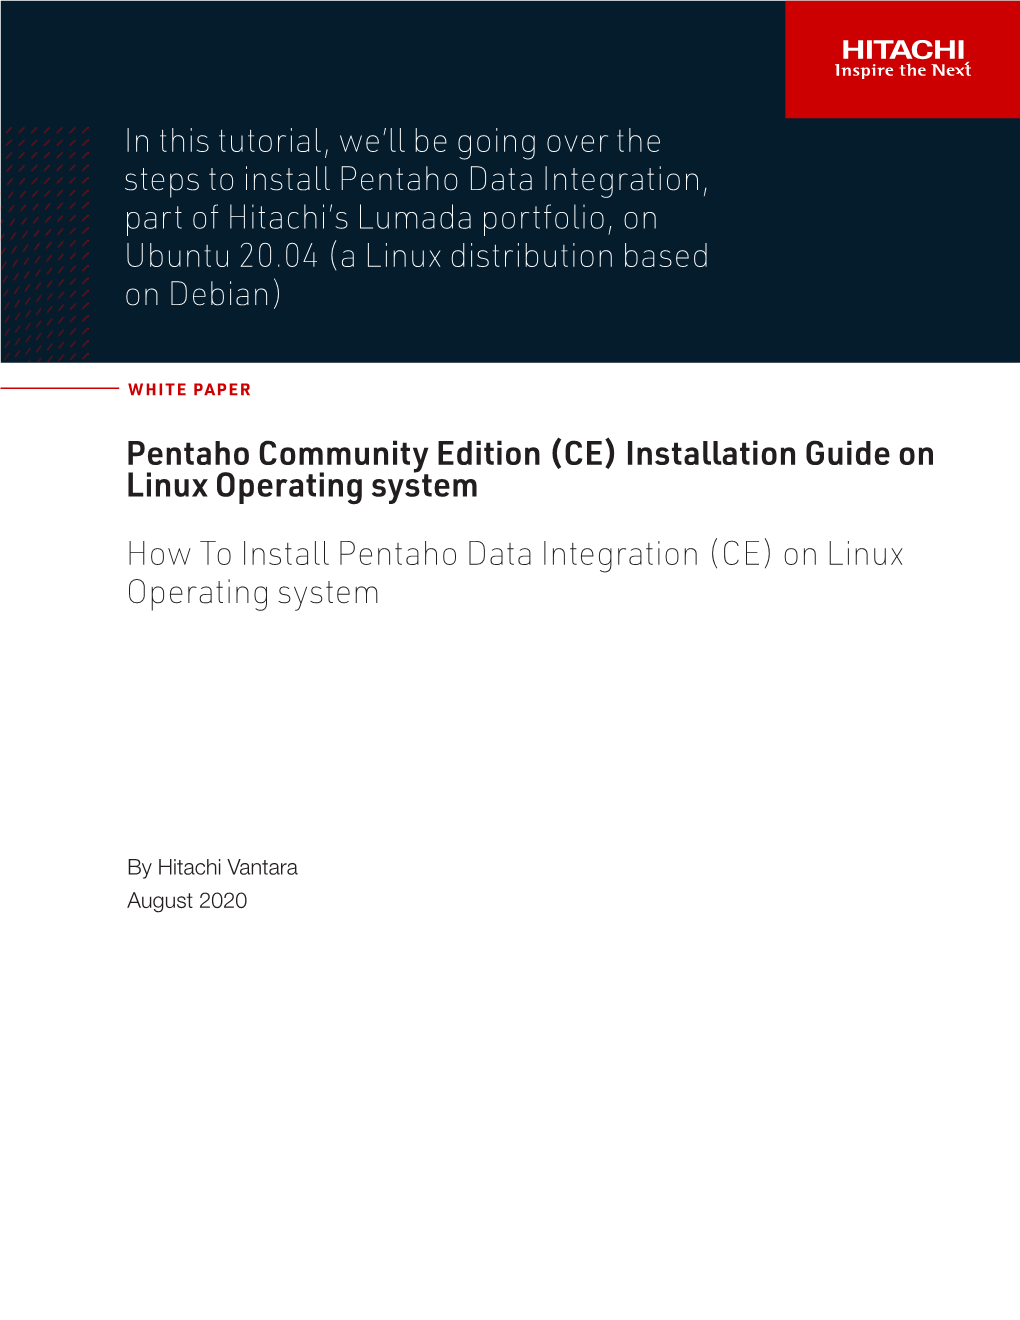 Pentaho Community Edition (CE) Installation Guide on Linux Operating System